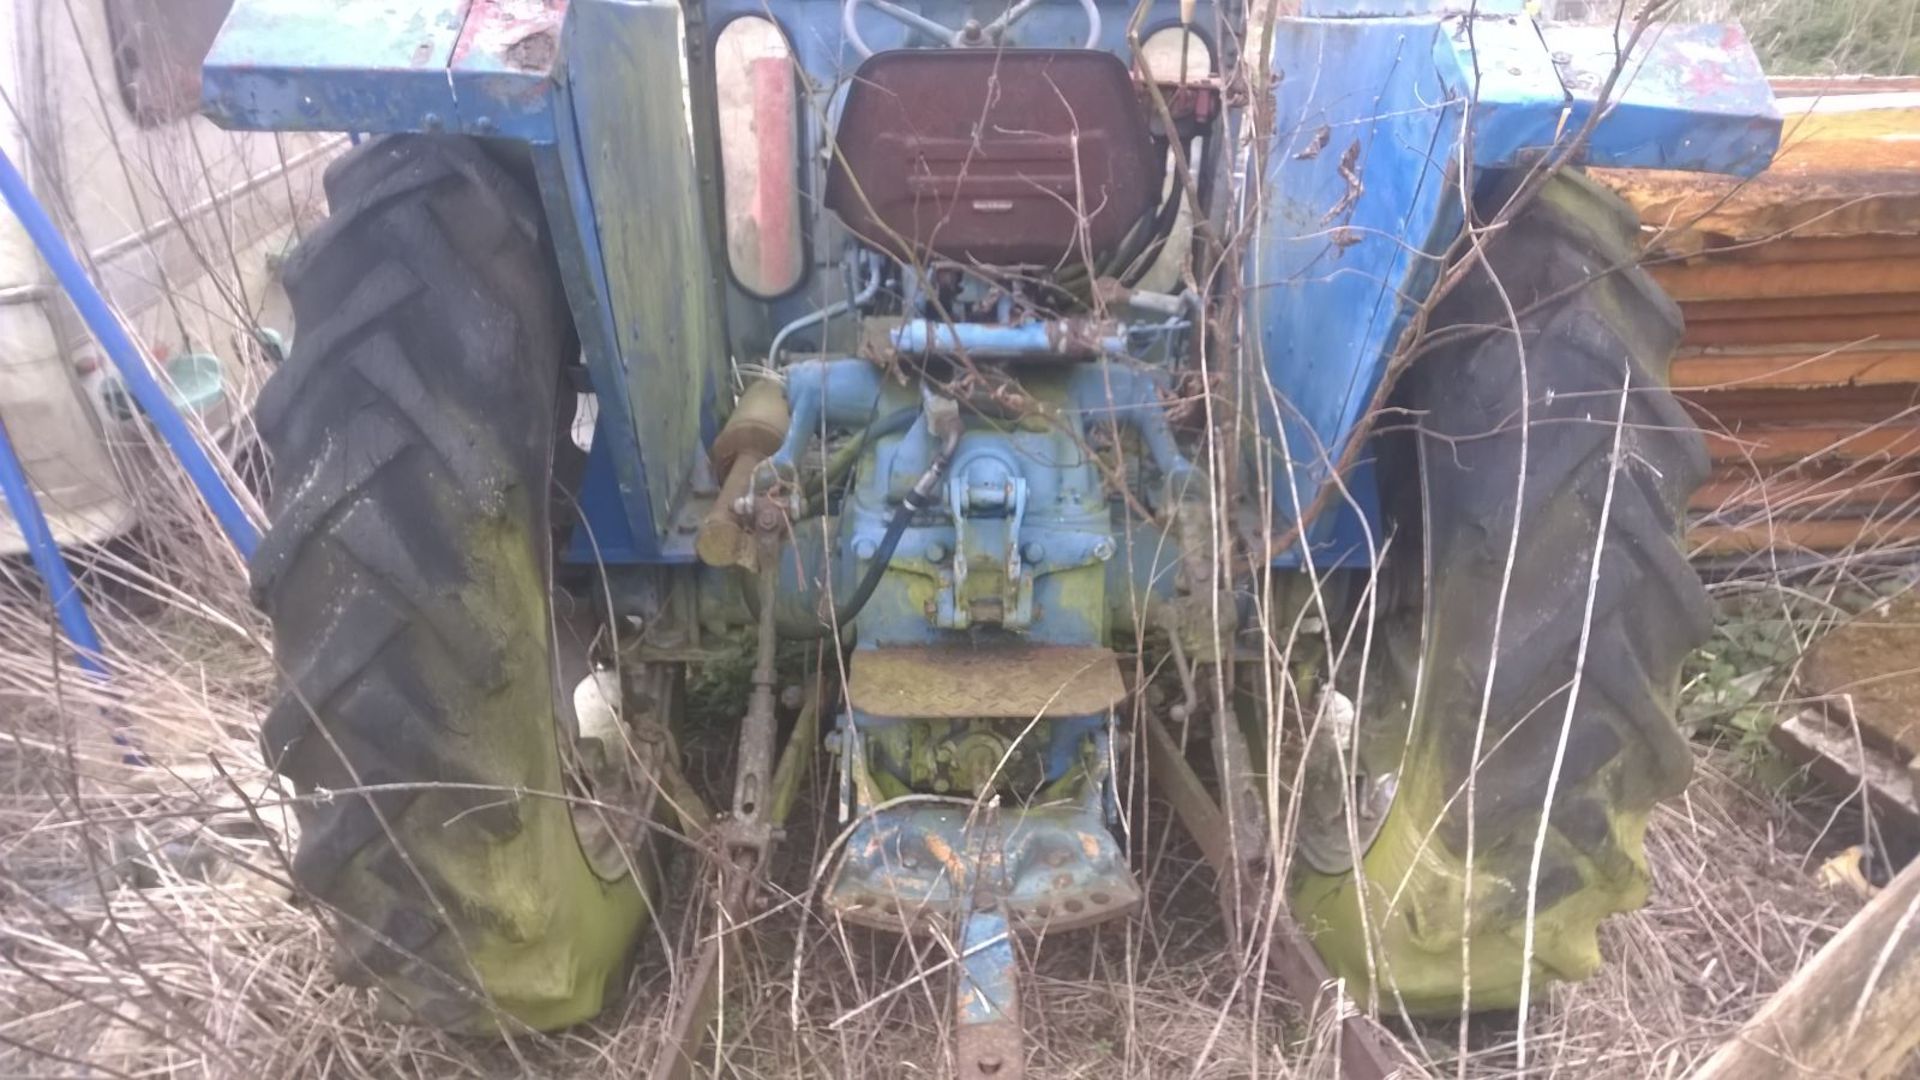 FORDSON  SUPER MAJOR c/w POWER LOADER   WE HAVENT HEARD IT RUNNING YET BUT WE ARE INTENDING TO GET - Image 16 of 20